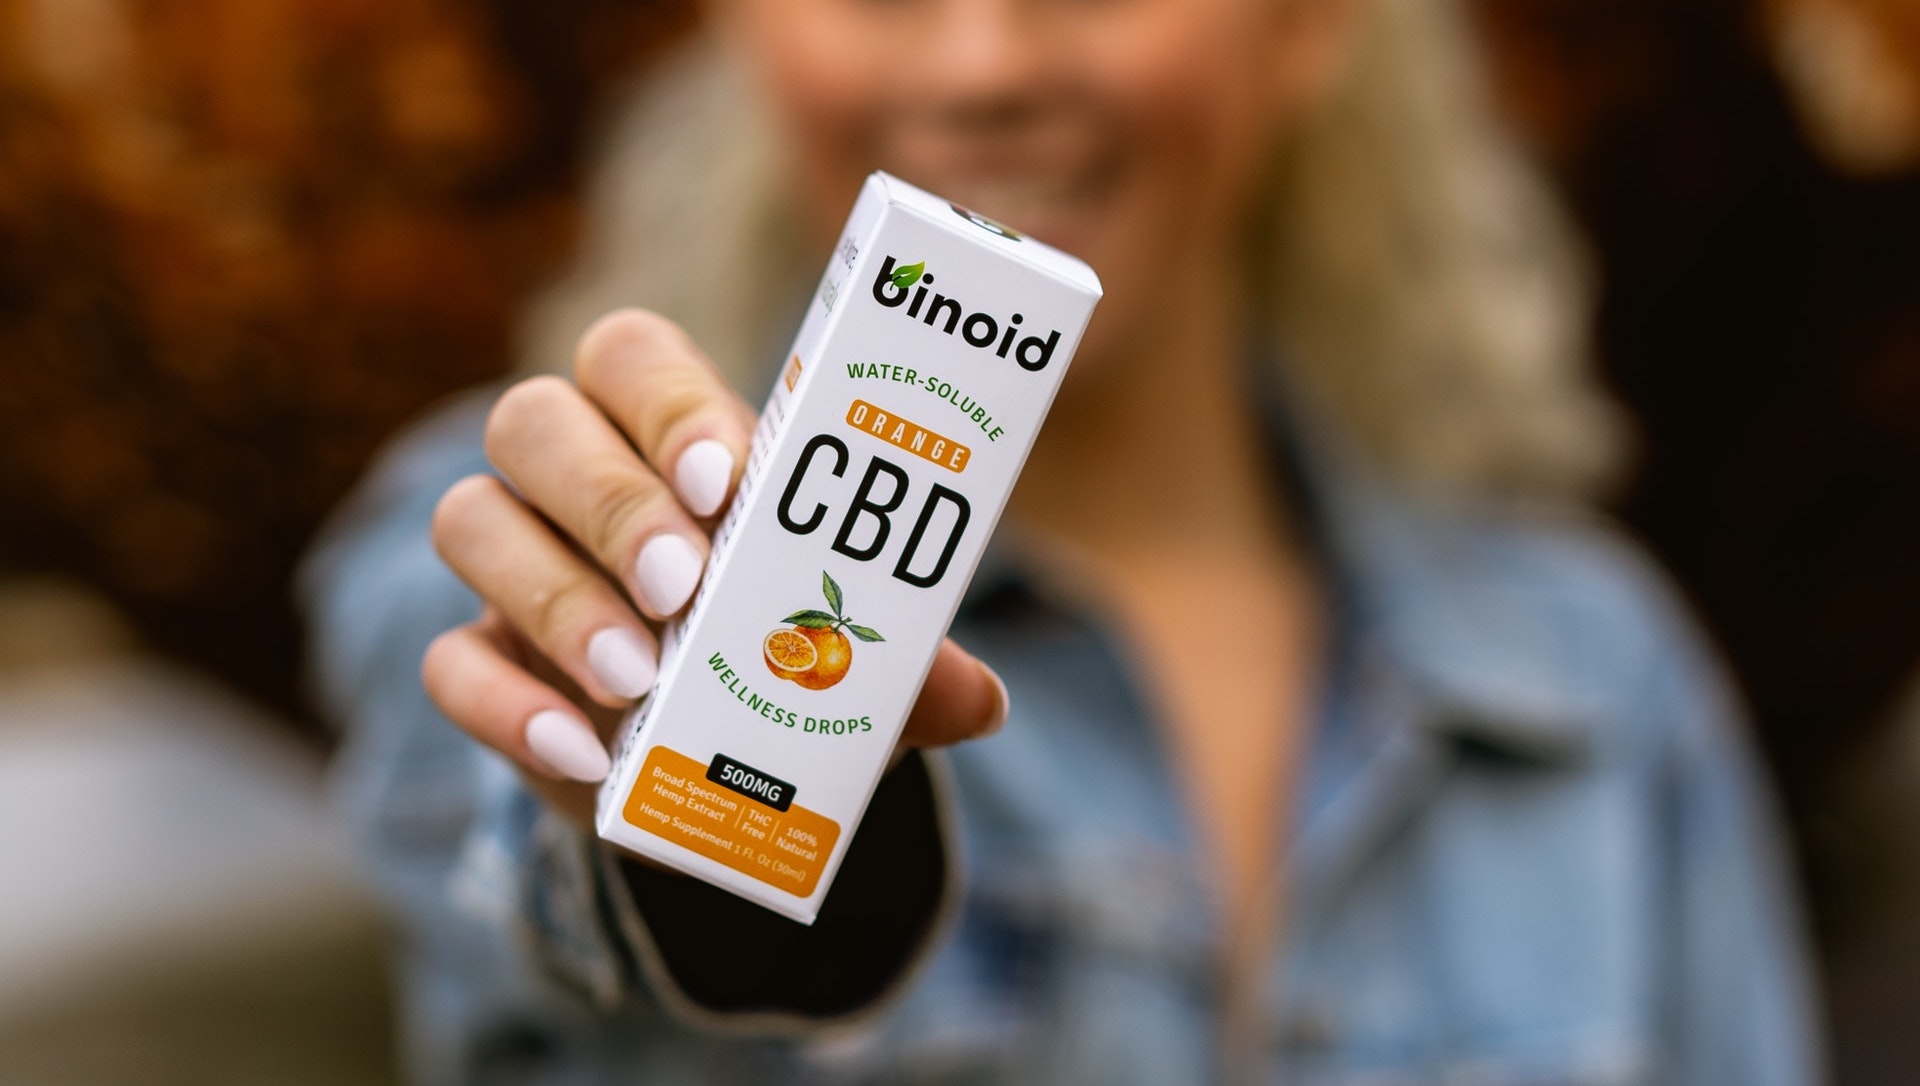 What is CBD Oil? How is it Used and What are its Benefits?